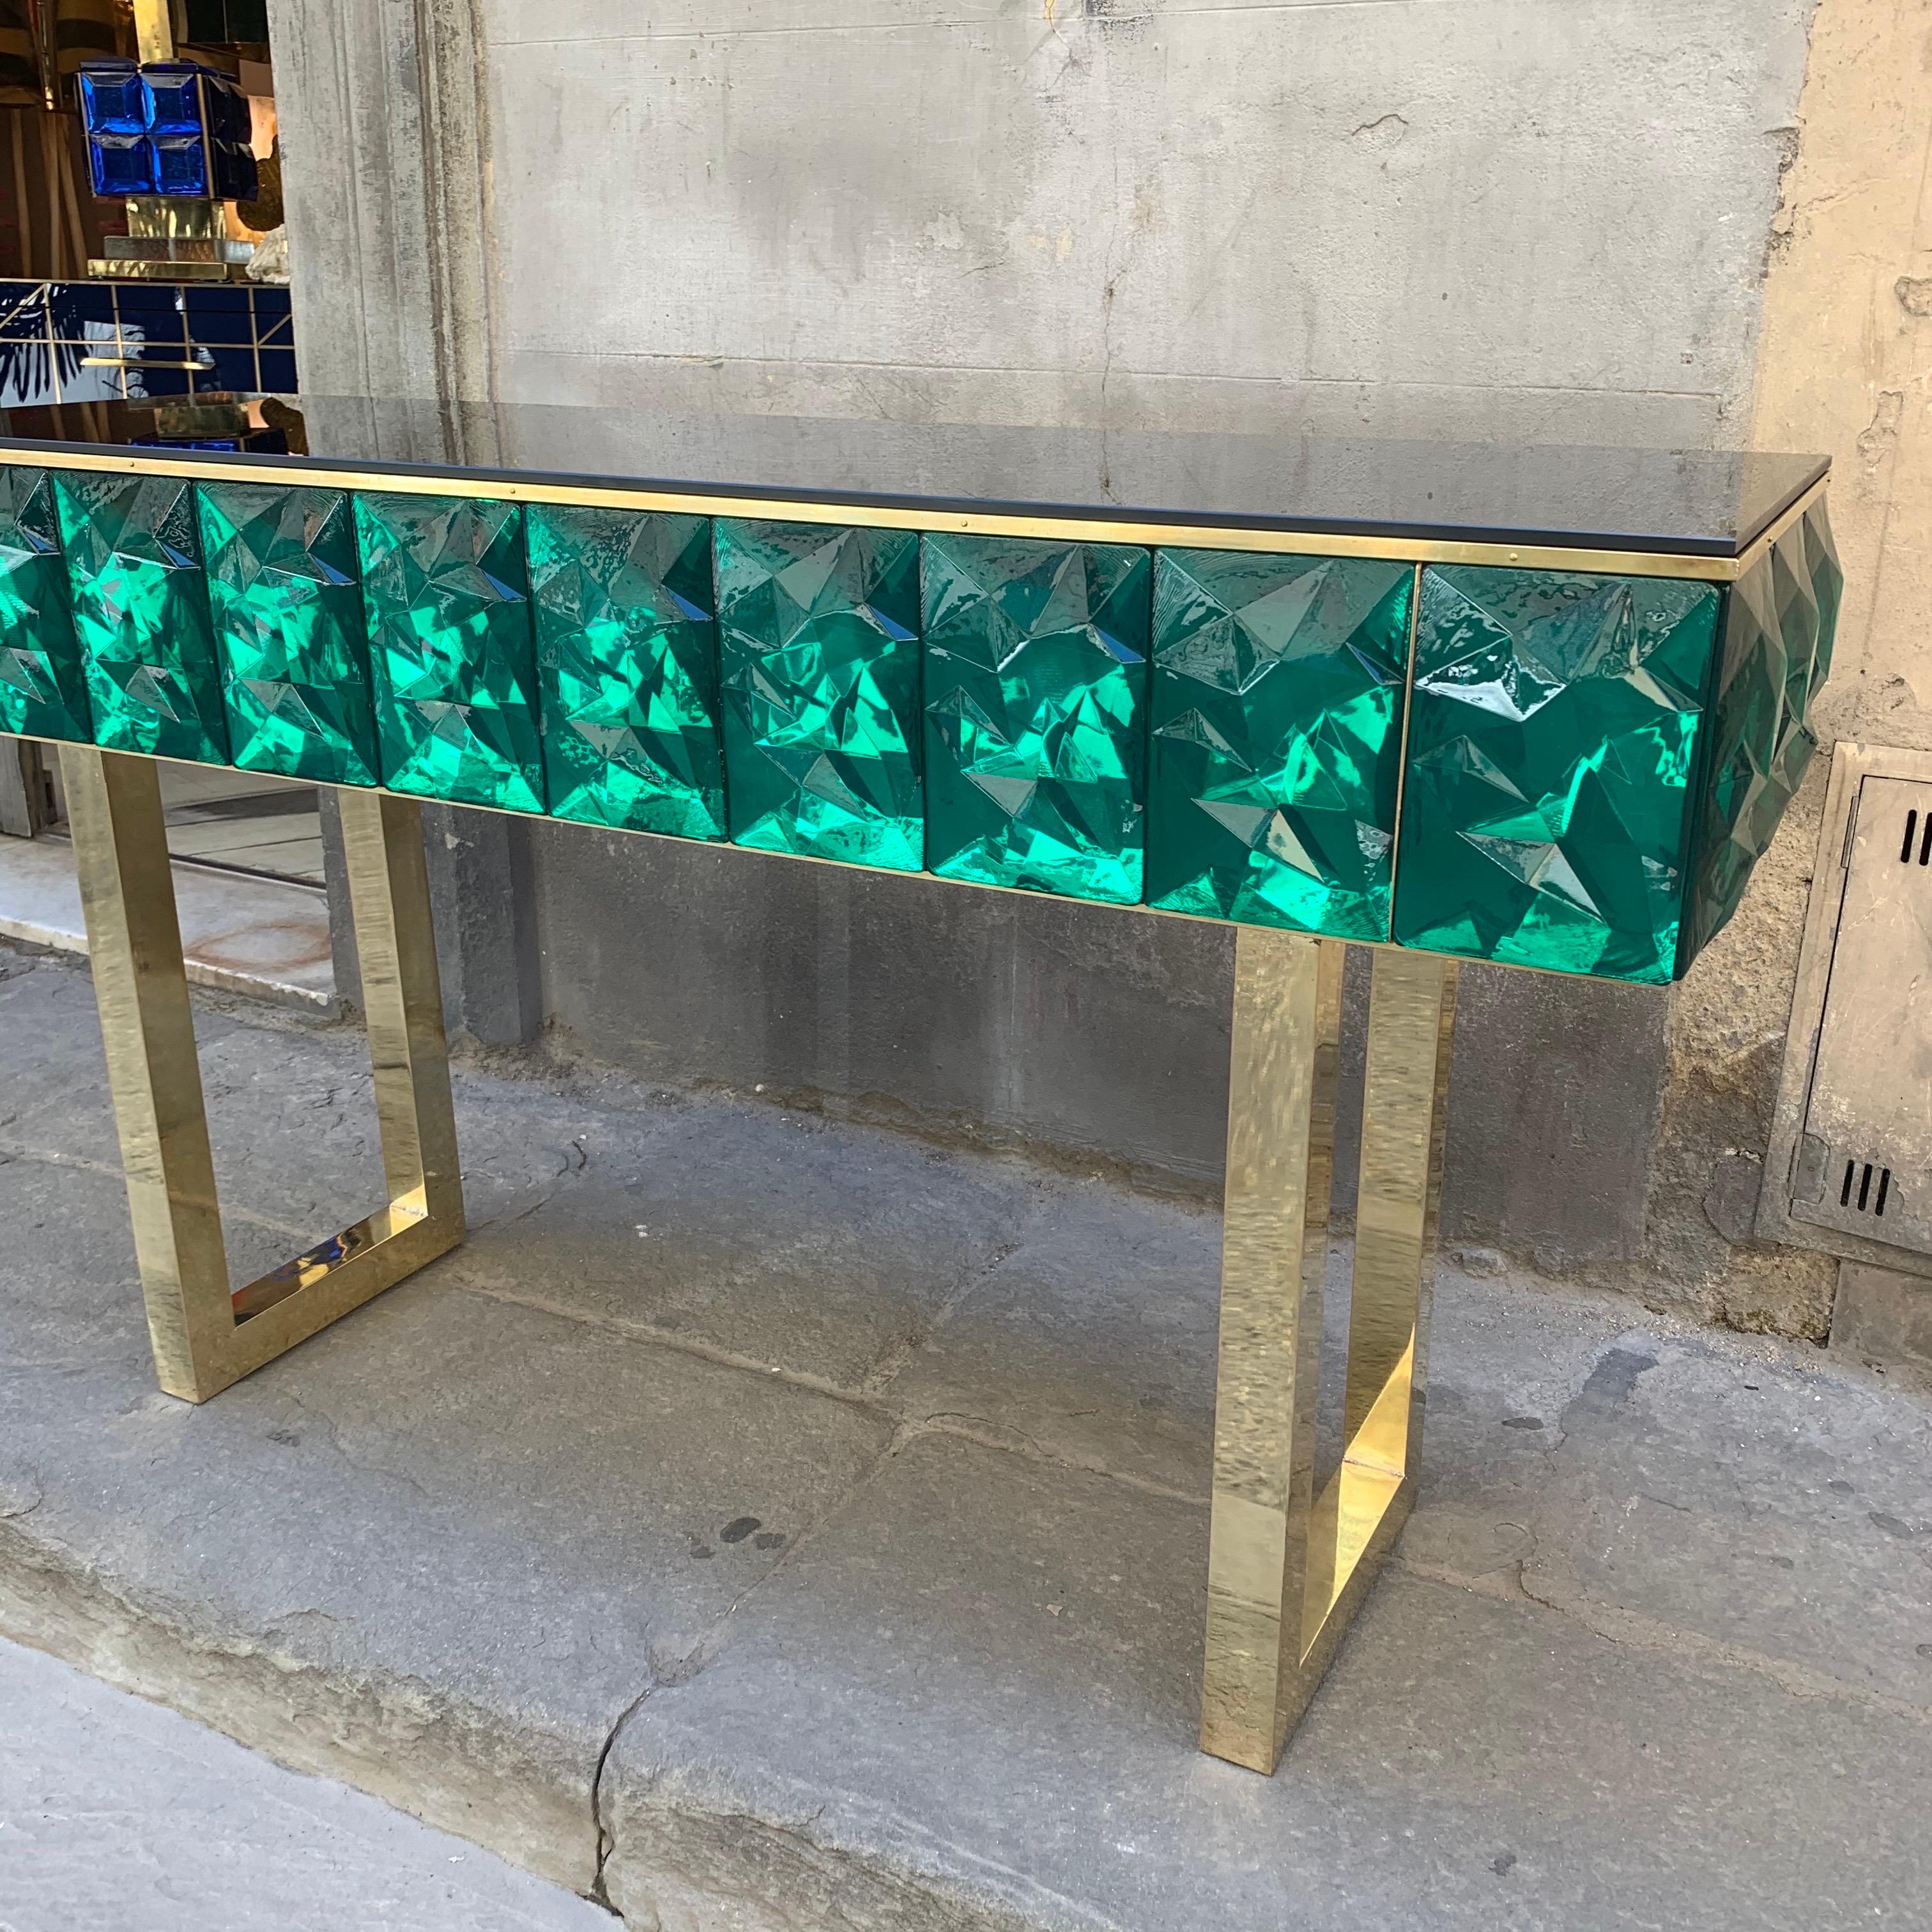 Emerald Murano Glass Console with Blue Black Opaline Glass Top, Brass Legs, 2020 For Sale 3